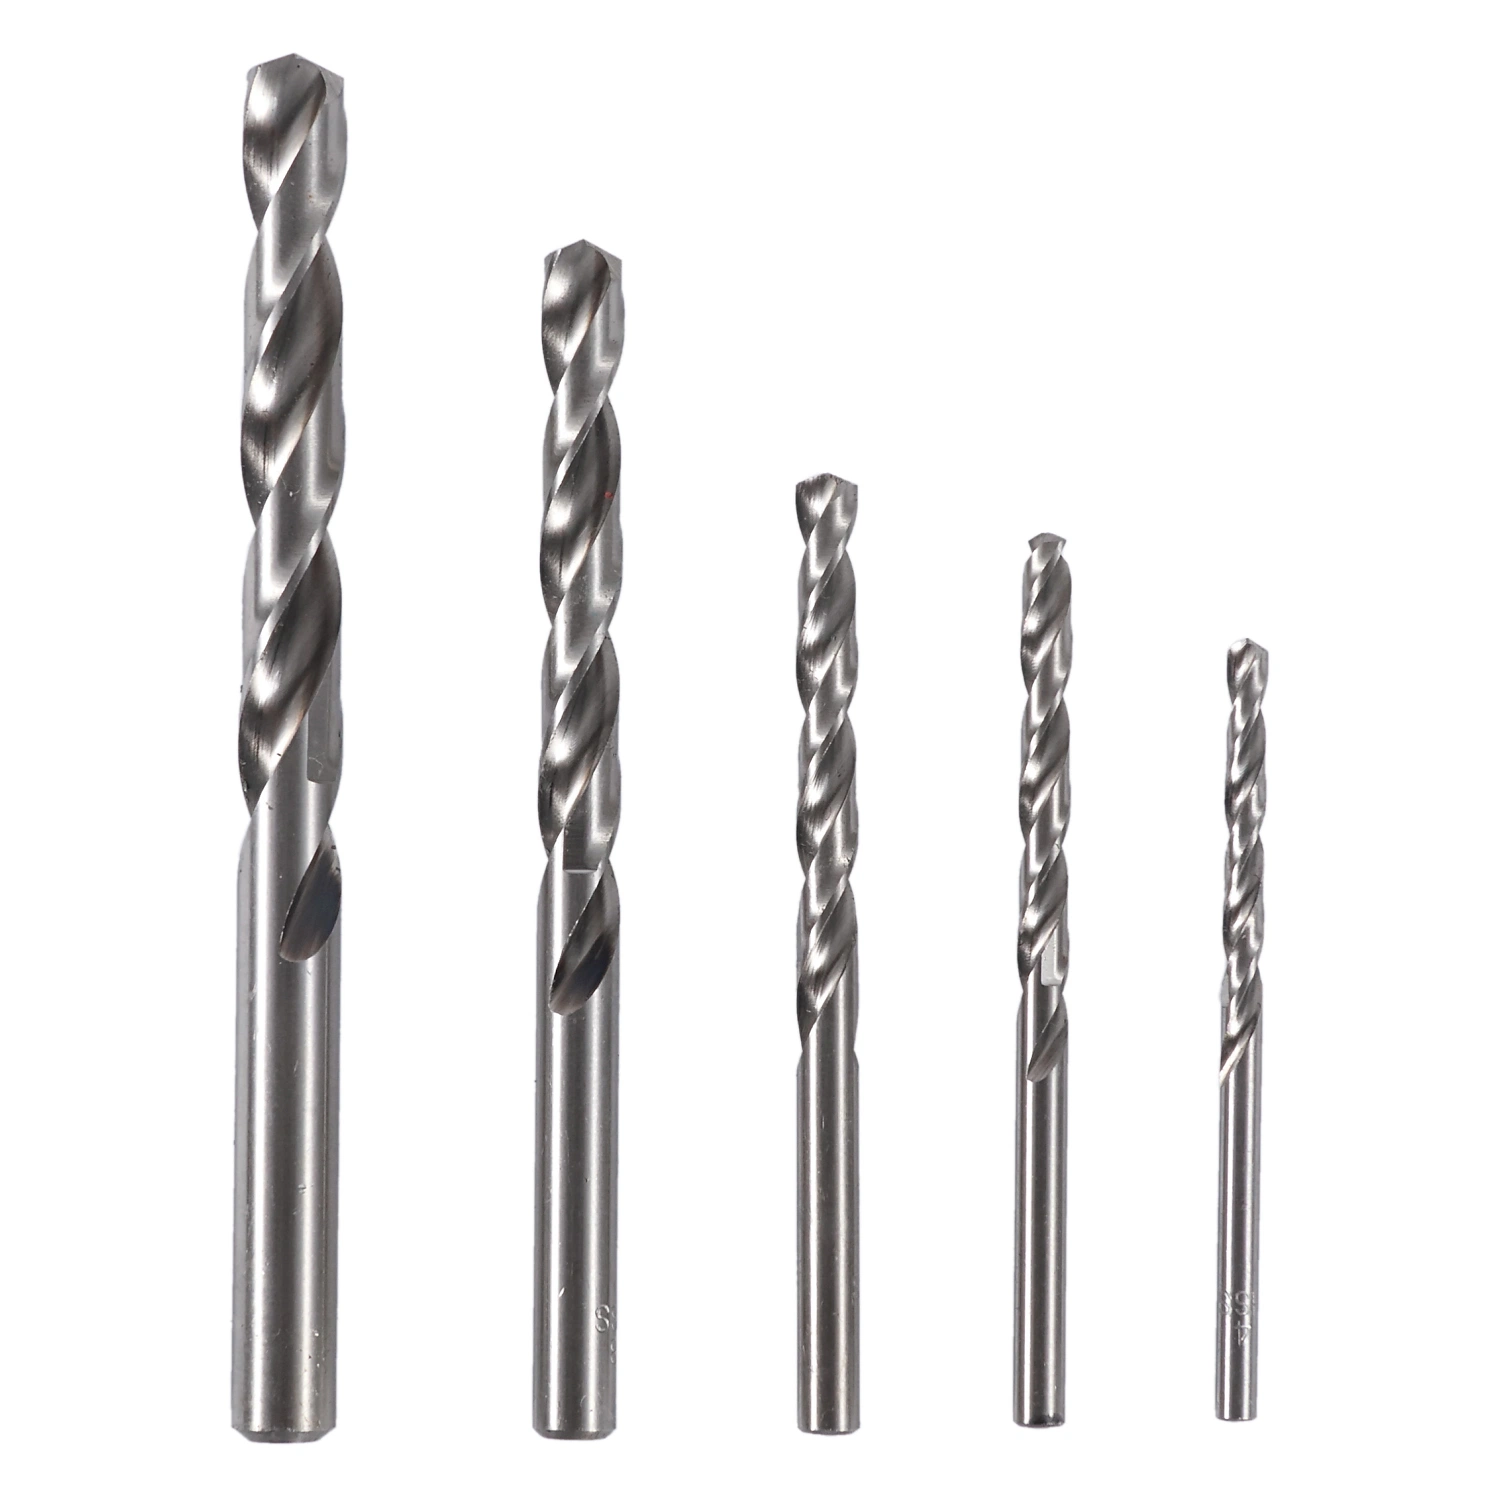 10% off DIN338 Fully Ground Power Tool Accessory HSS Inox Drill Bits for Stainless Steel Metal Jobber Twist Drill Bit with Tin Coating